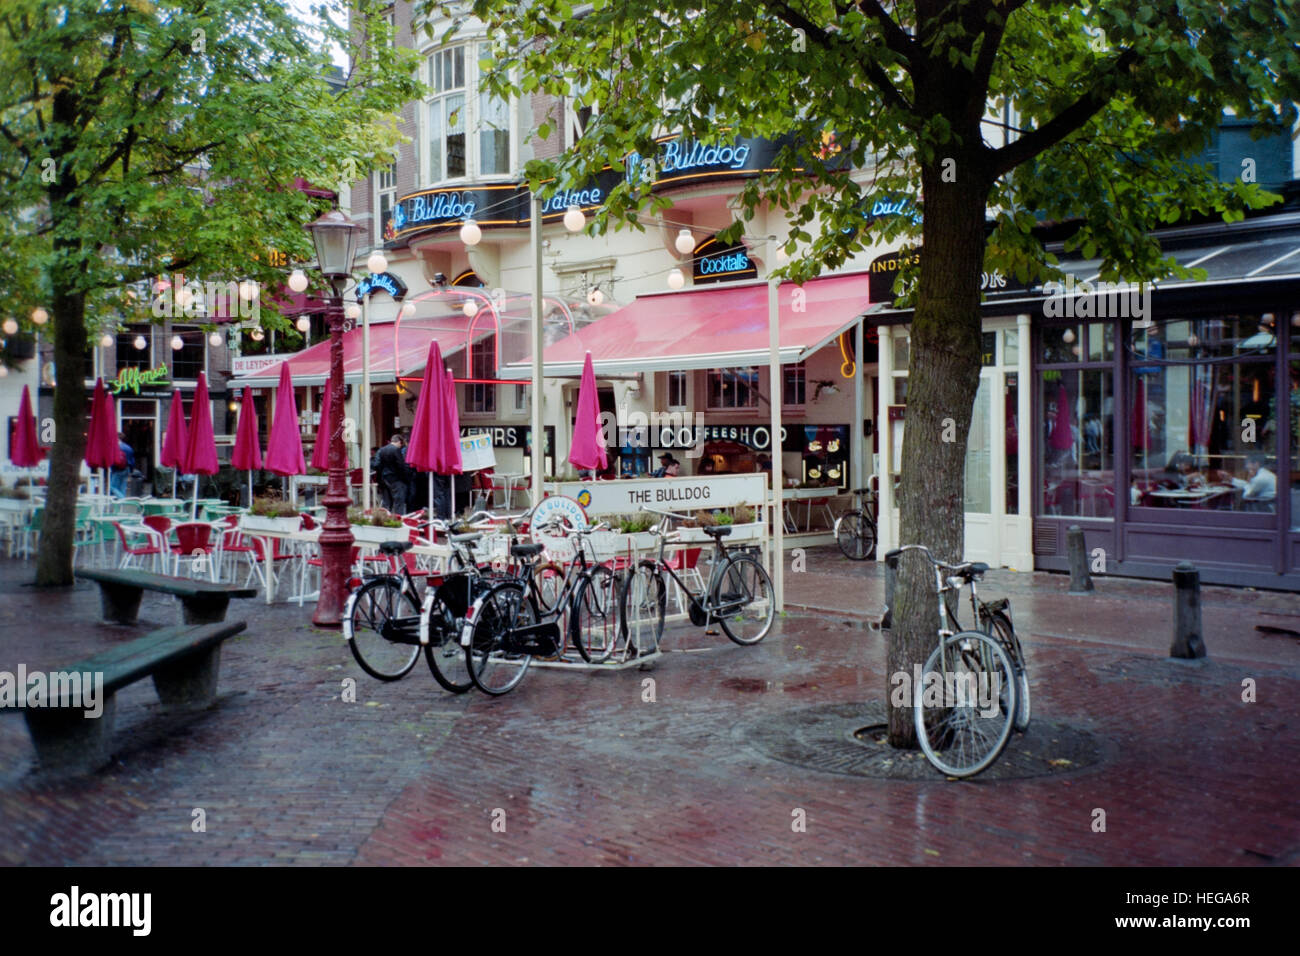 exterior of one of the bulldog cafes in amsterdam holland Stock Photo